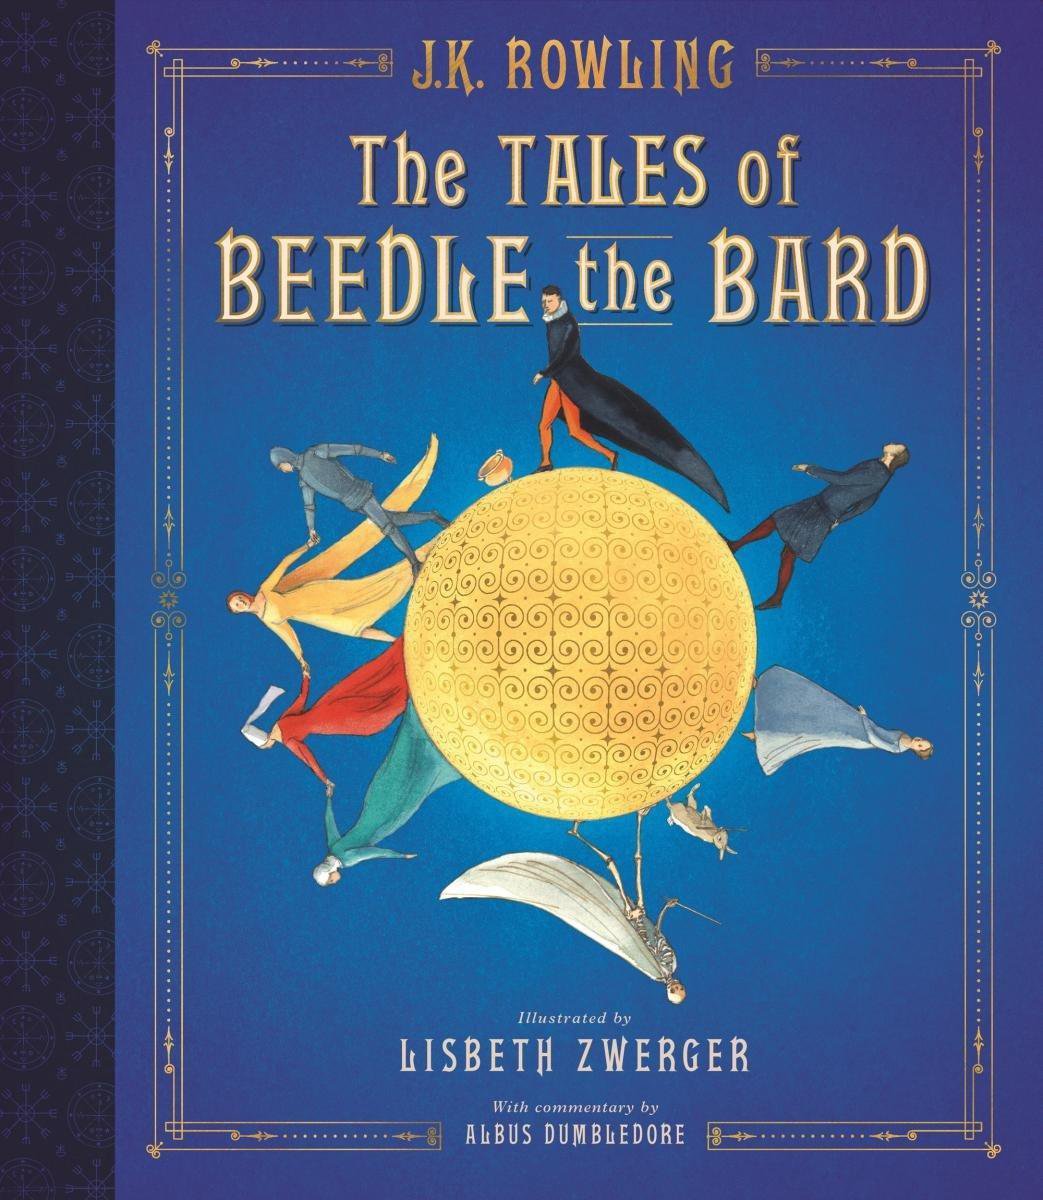 The Tales of Beedle the Bard Illustrated Edition Harry Potter - J.K. Rowling